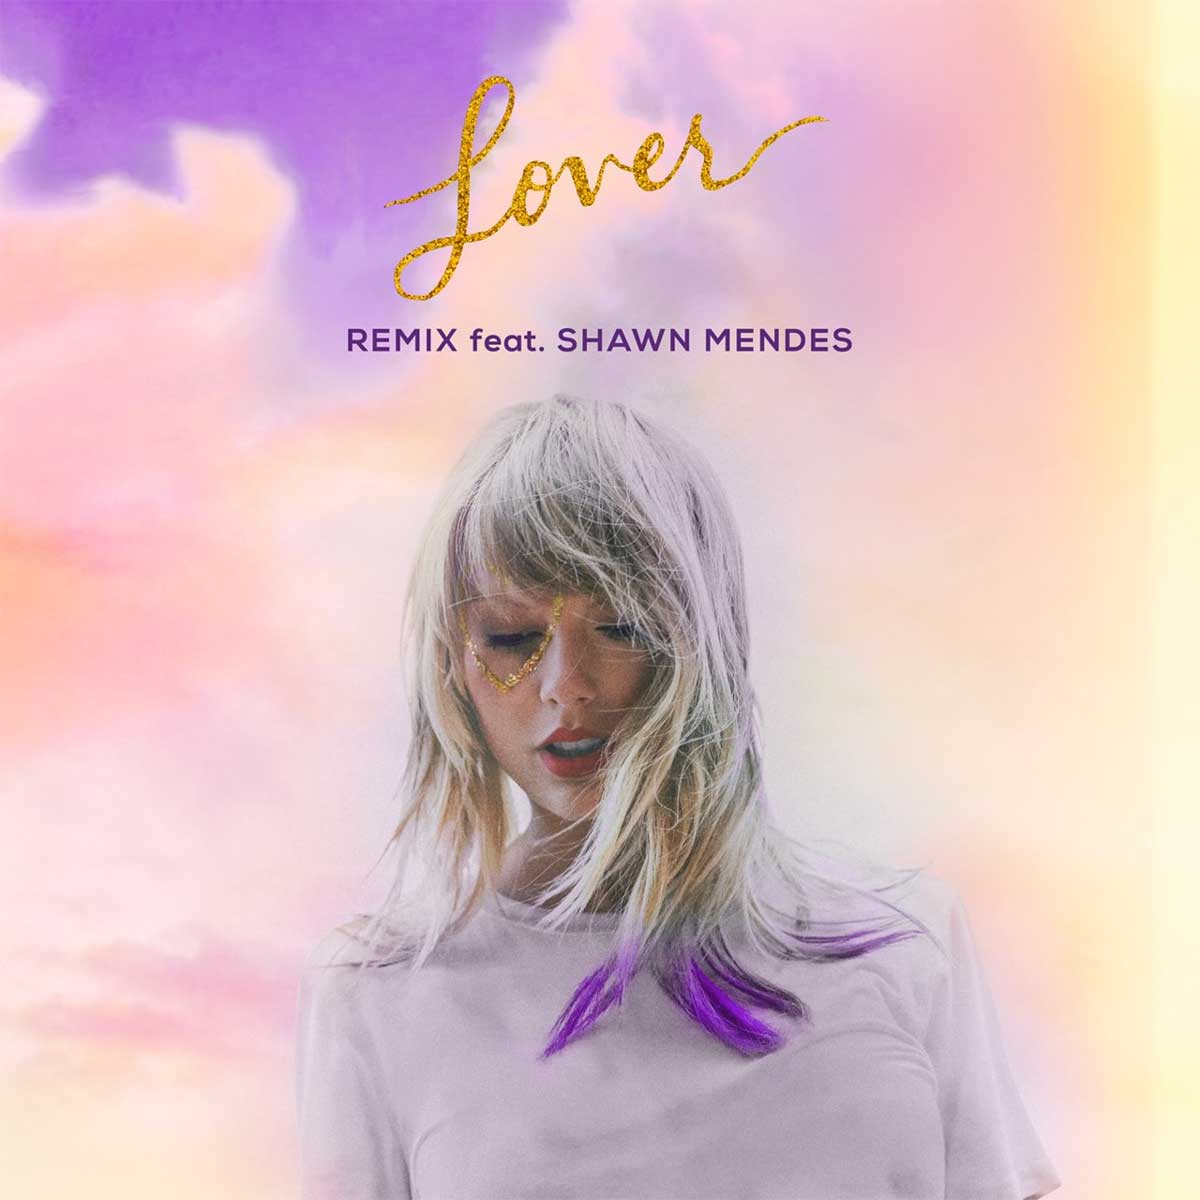 「Lover (Remix) feat. Shawn Mendes」